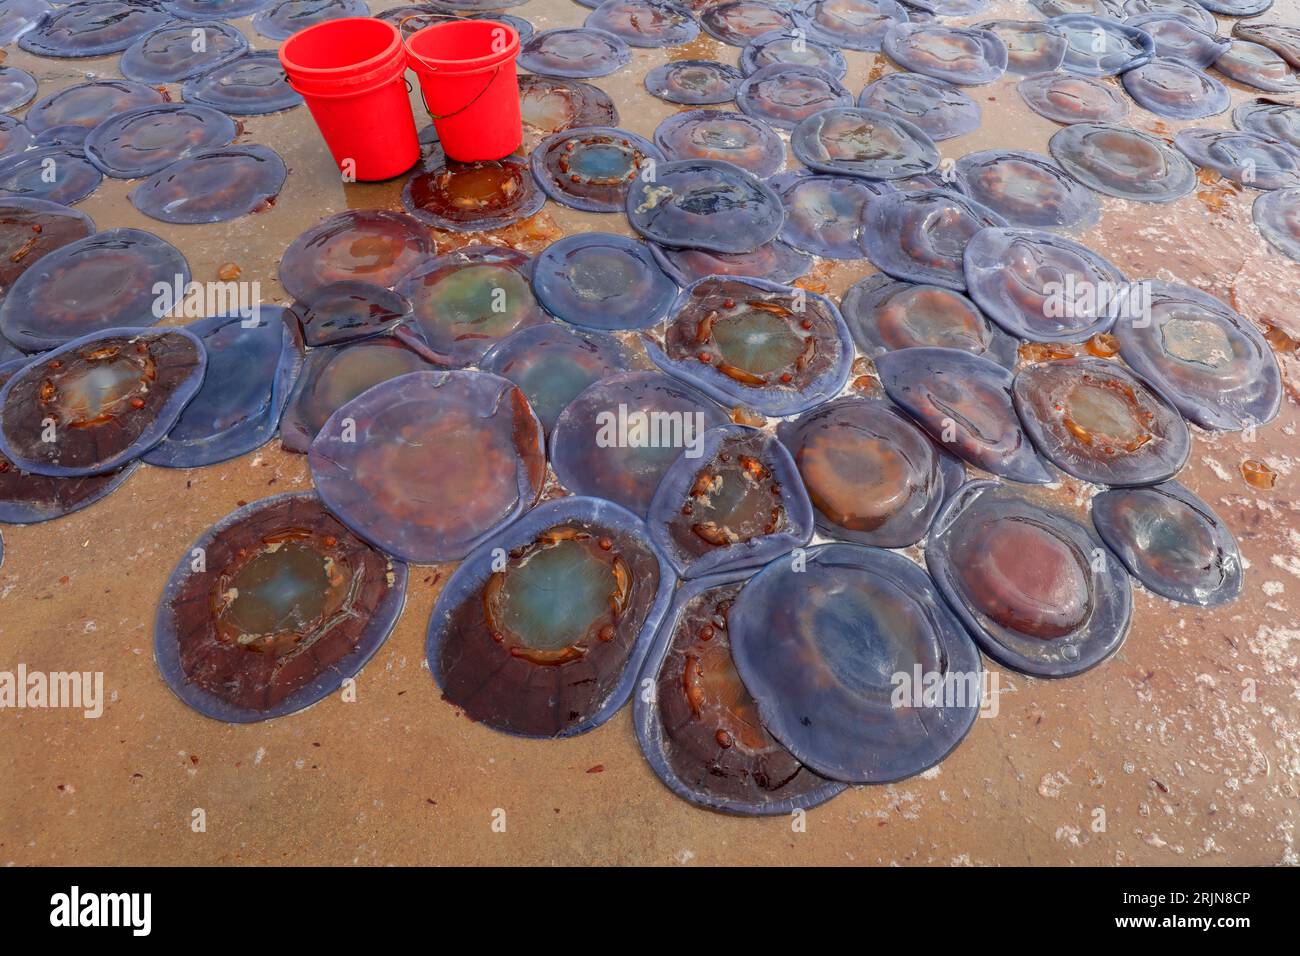 Jellyfish skin covers the ground at a seafood processing plant in North China Stock Photo